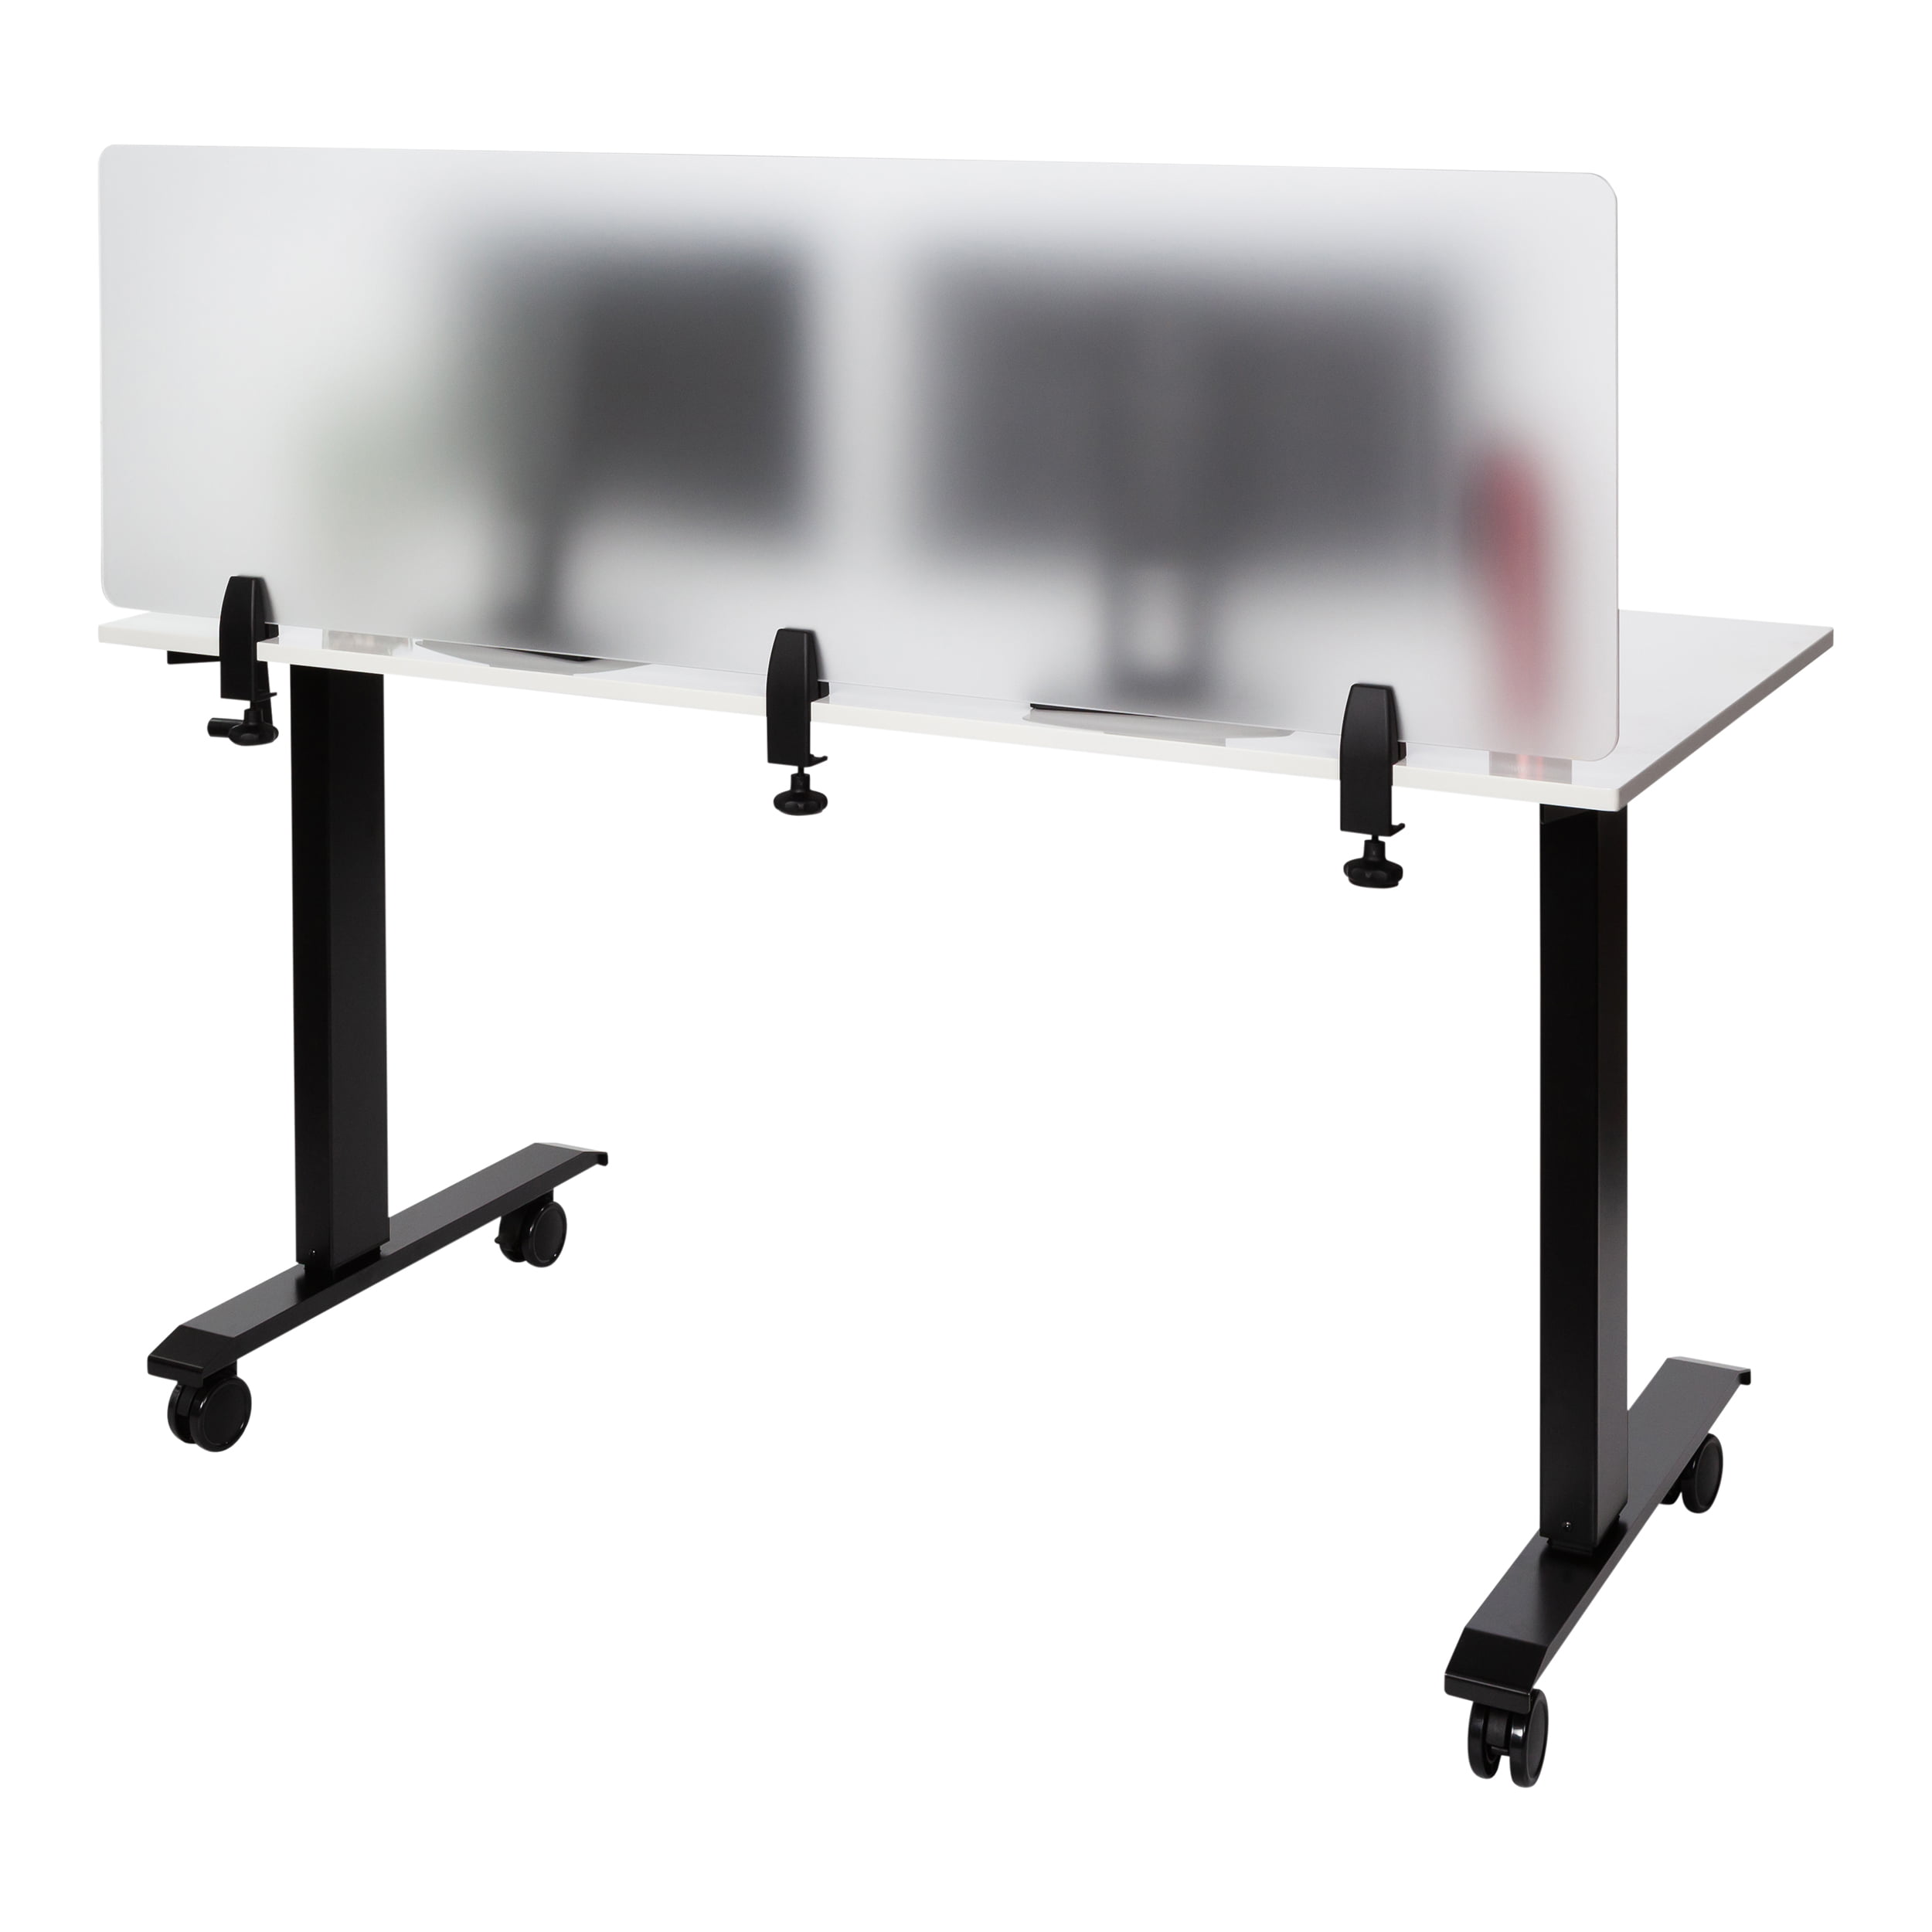 Stand Up Desk Store ReFocus Clamp-On Acrylic Desk Divider Partition Sneeze Guard Shield Clear, 48 W x 30 H 